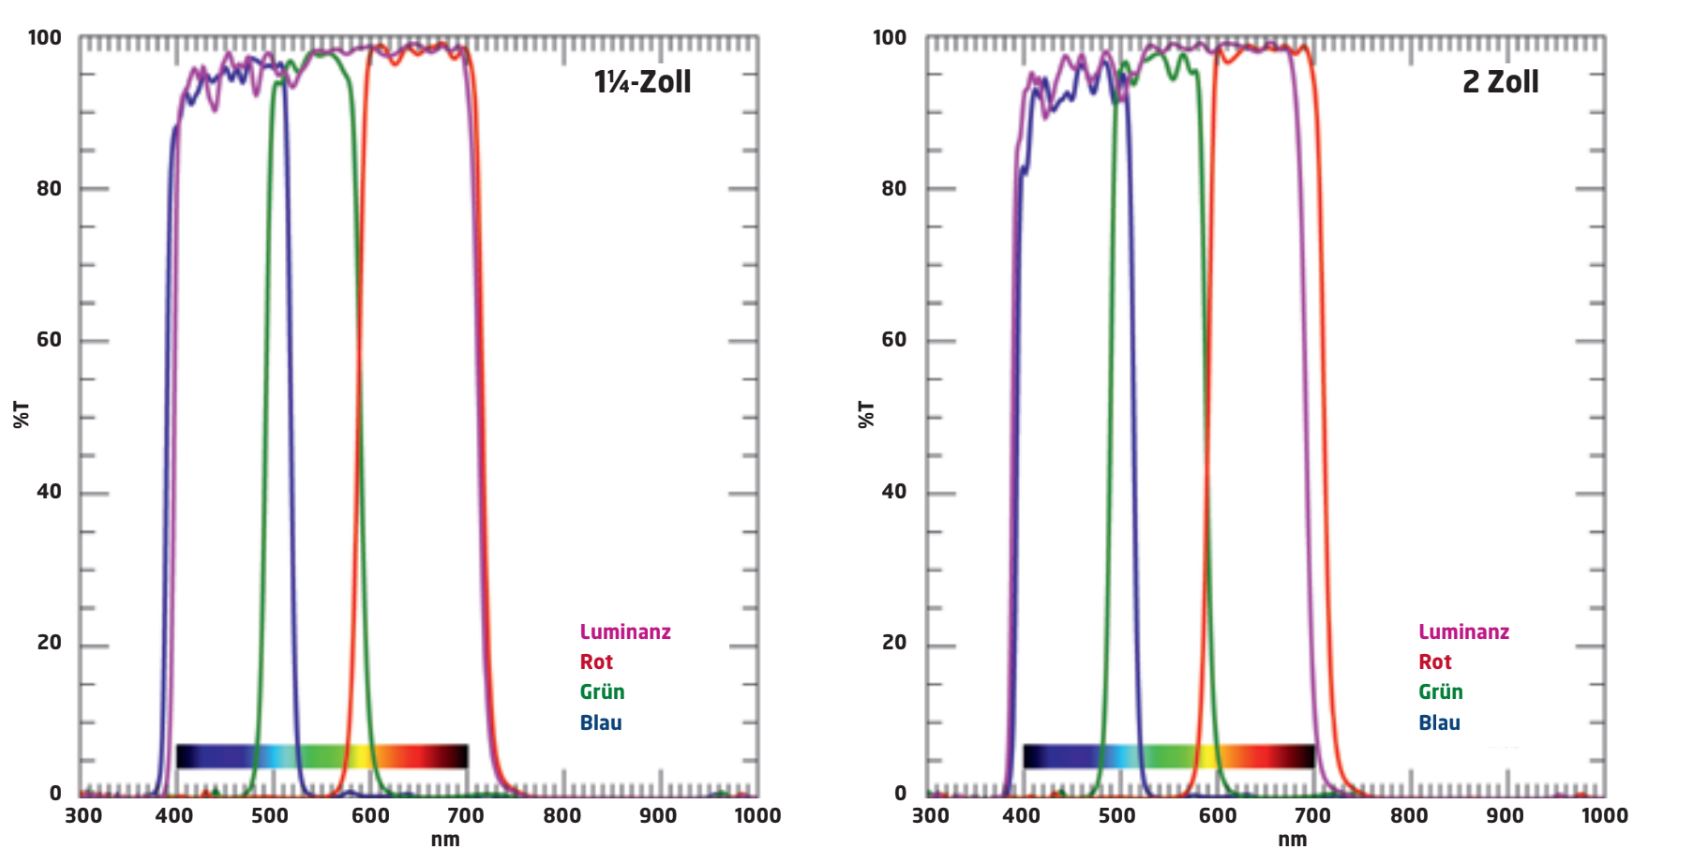 Transmission diagrams of the luminance, red, green, and blue filters.